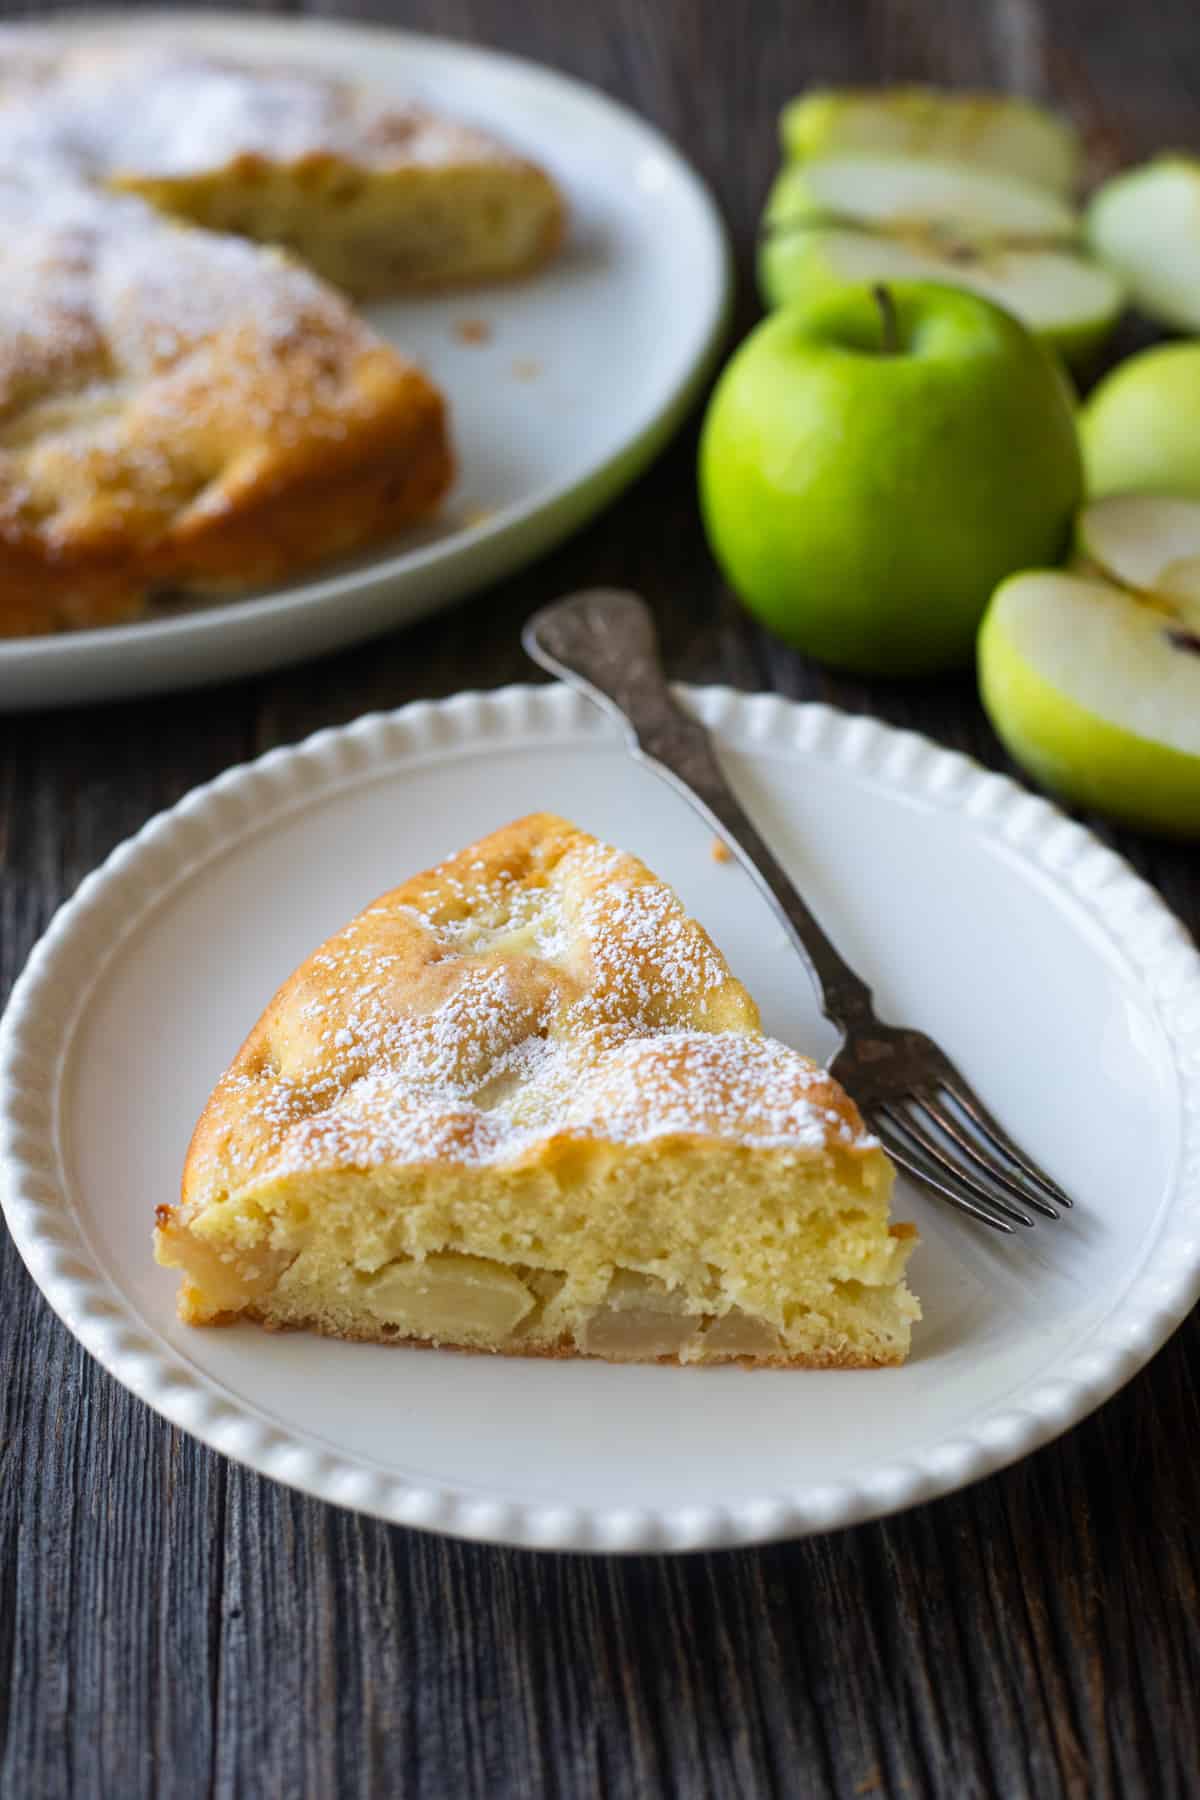 A slice of French apple cake on a plate.